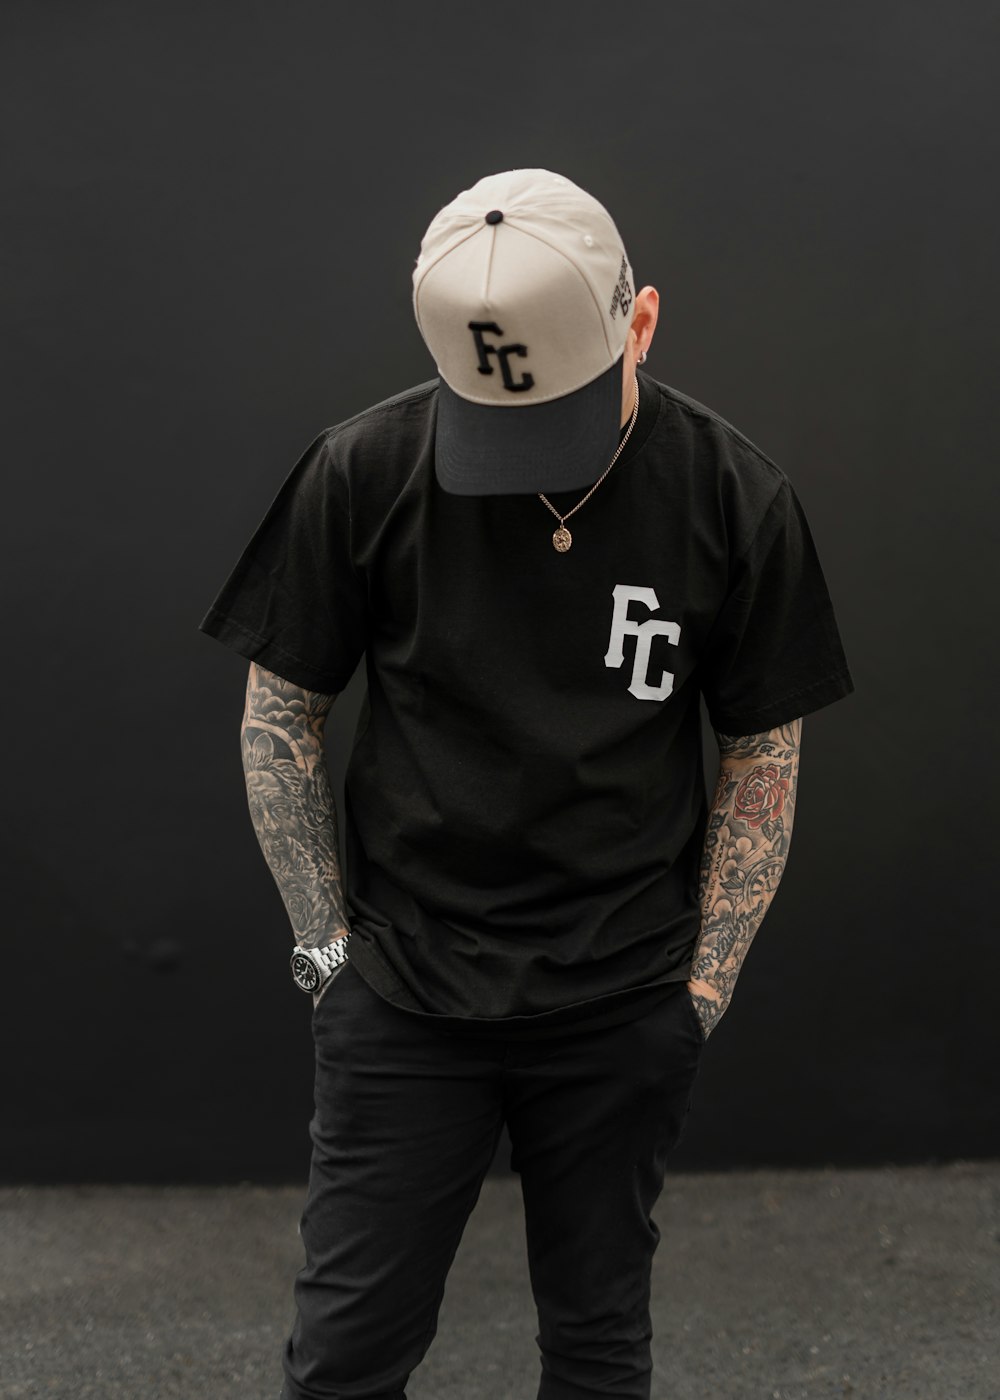 a man with tattoos wearing a black shirt and a hat